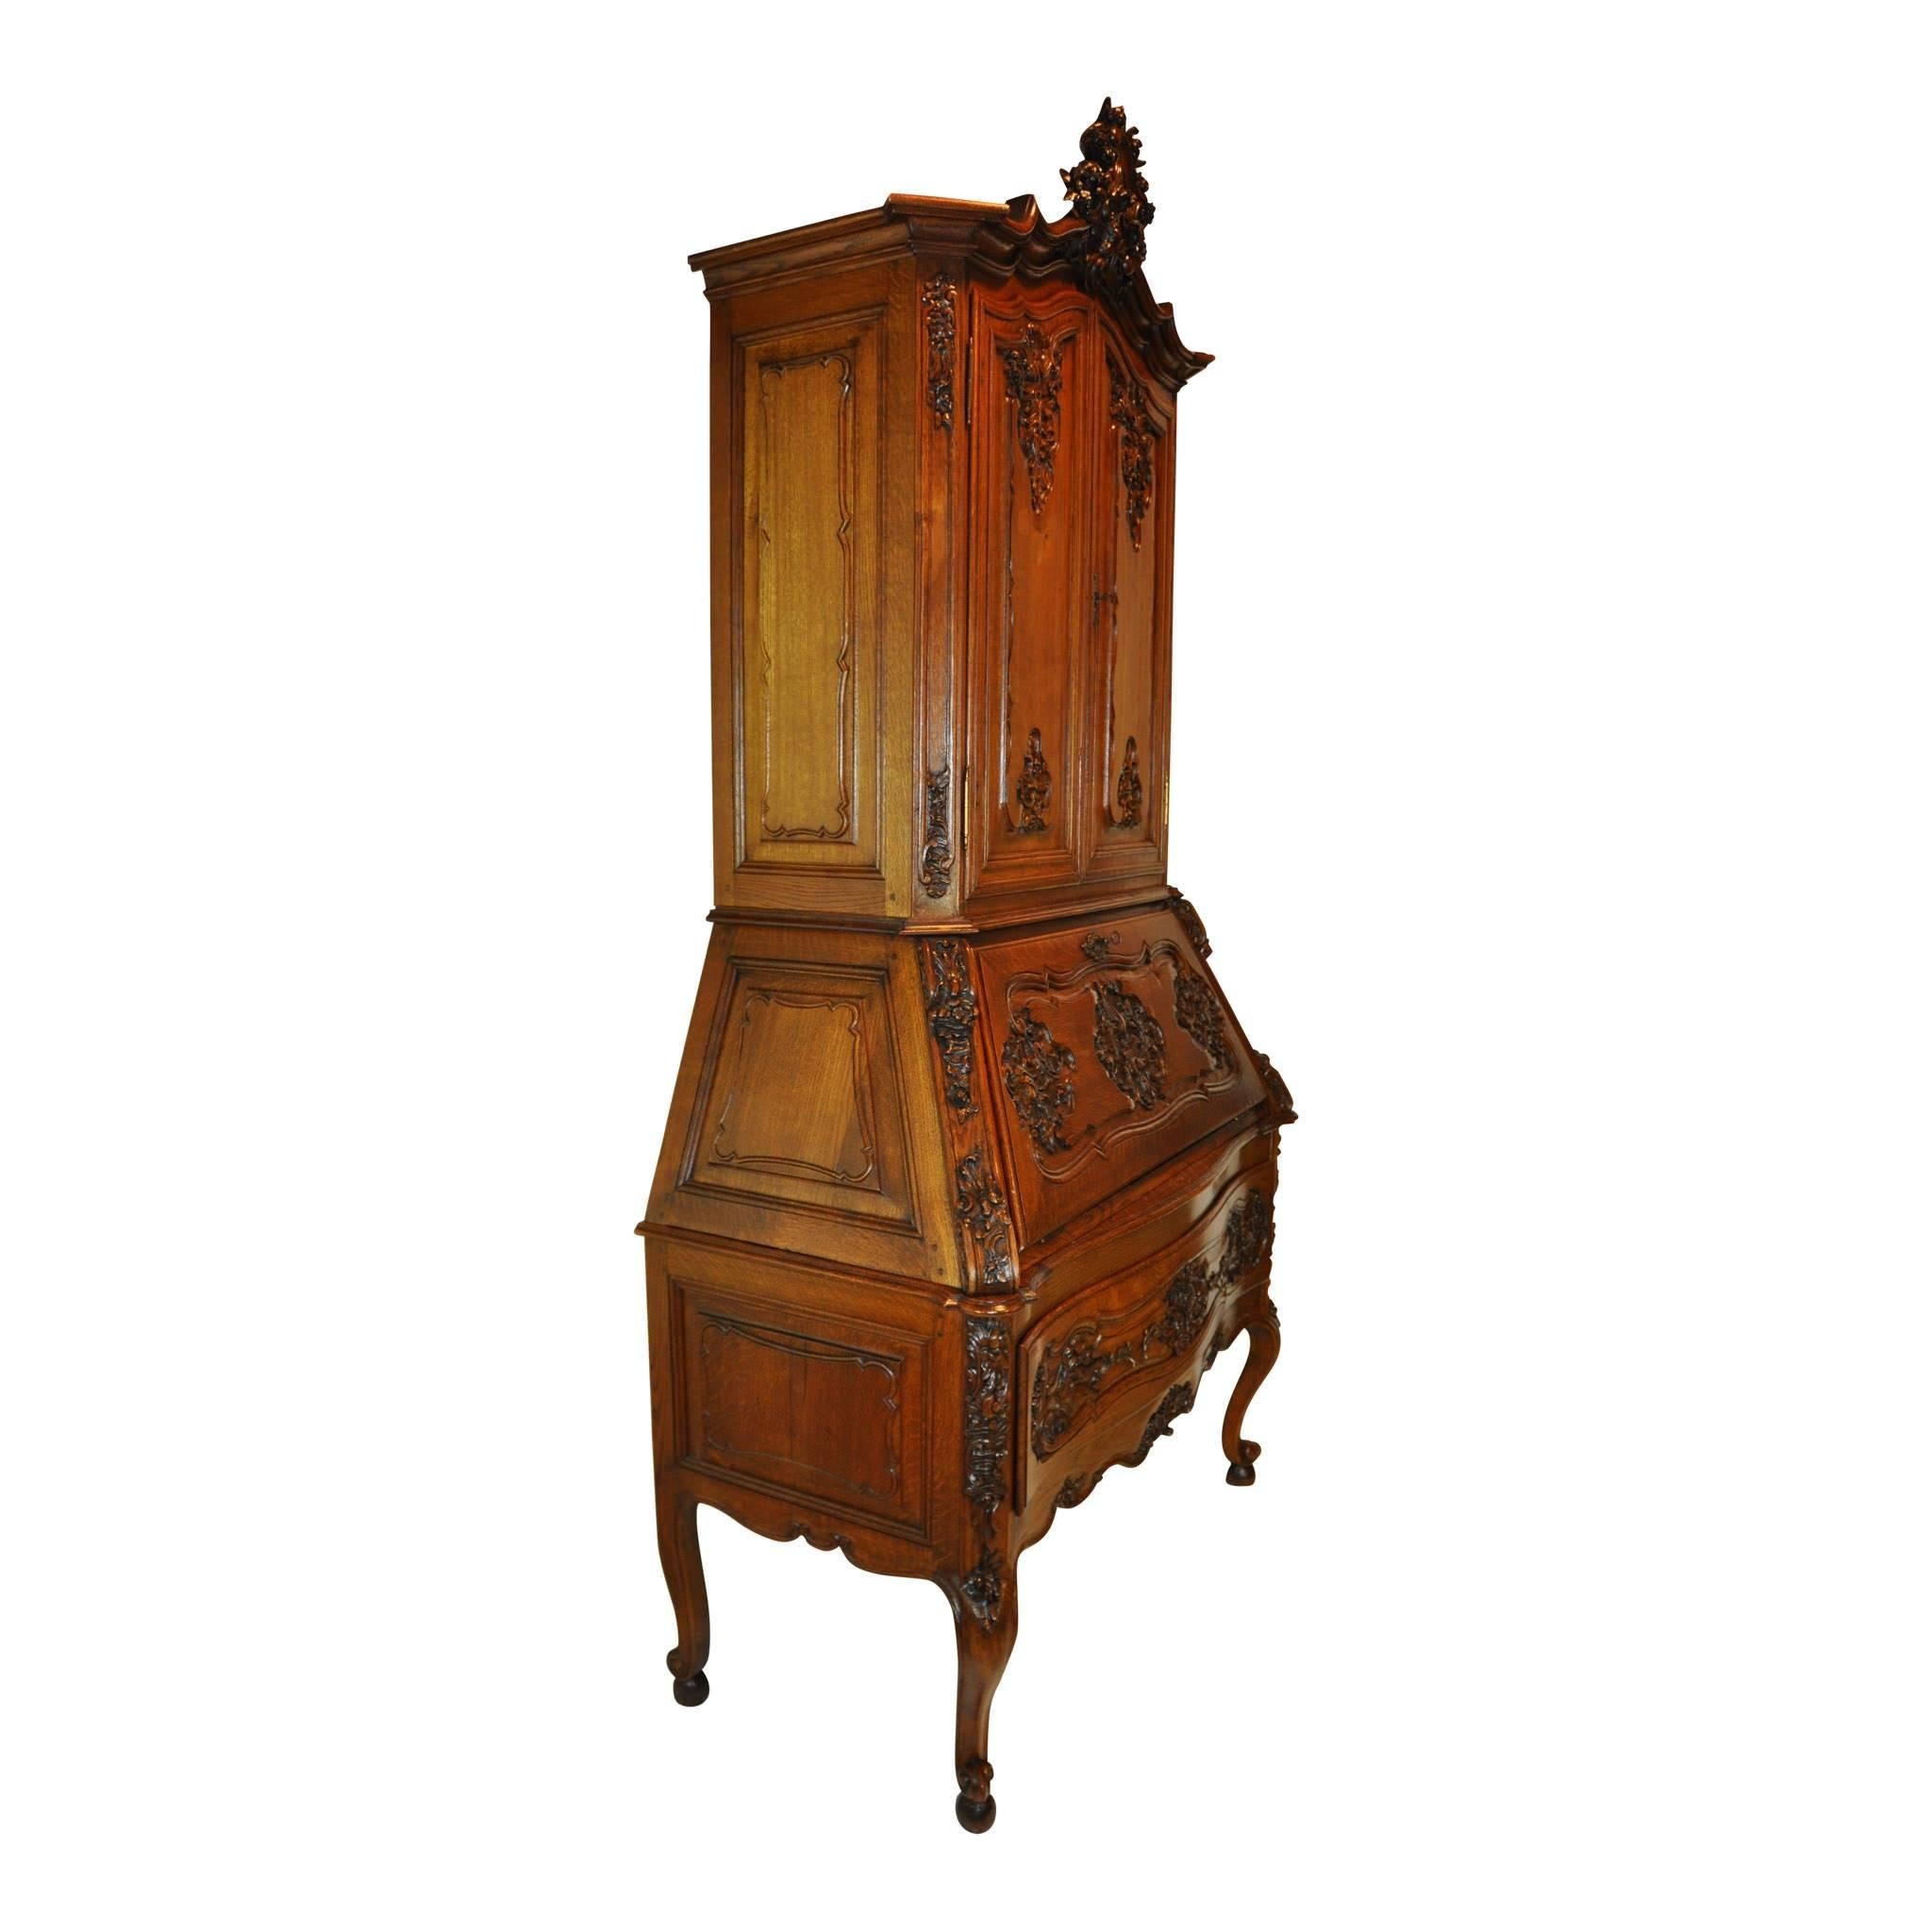 This beautiful quarter sawn oak secretary is comprised of three pieces. It features a top shelf cabinet with two shelves, a middle section with a drop down writing surface and eight compartments, and a base with a wide, deep drawer on cabriole legs